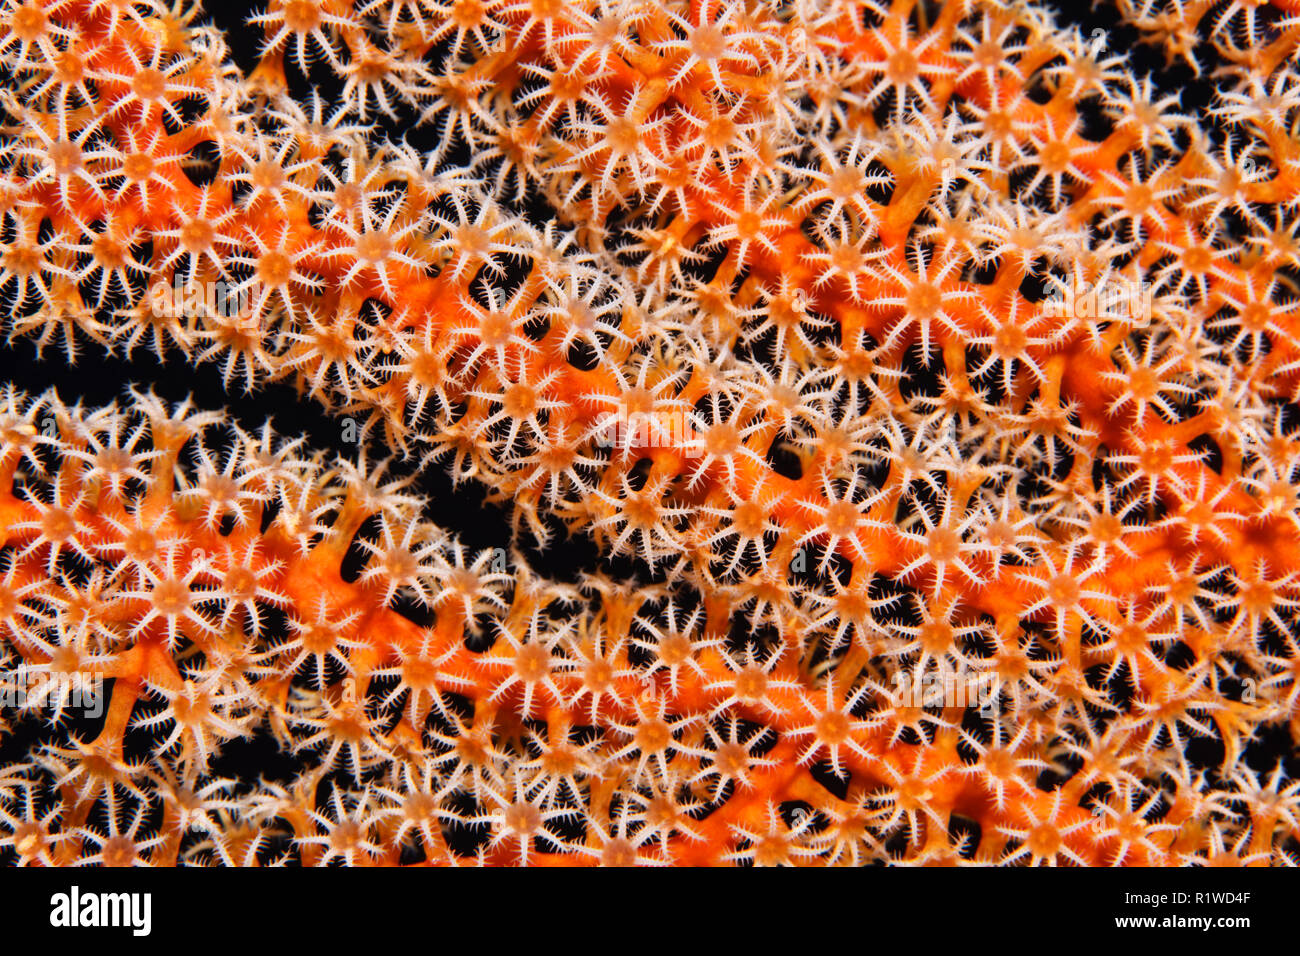 Coral fan, Gorgonian (Gorgonacea), detail with open coral polyps, Selayar South Sulawesi, Pacific, Indonesia Stock Photo